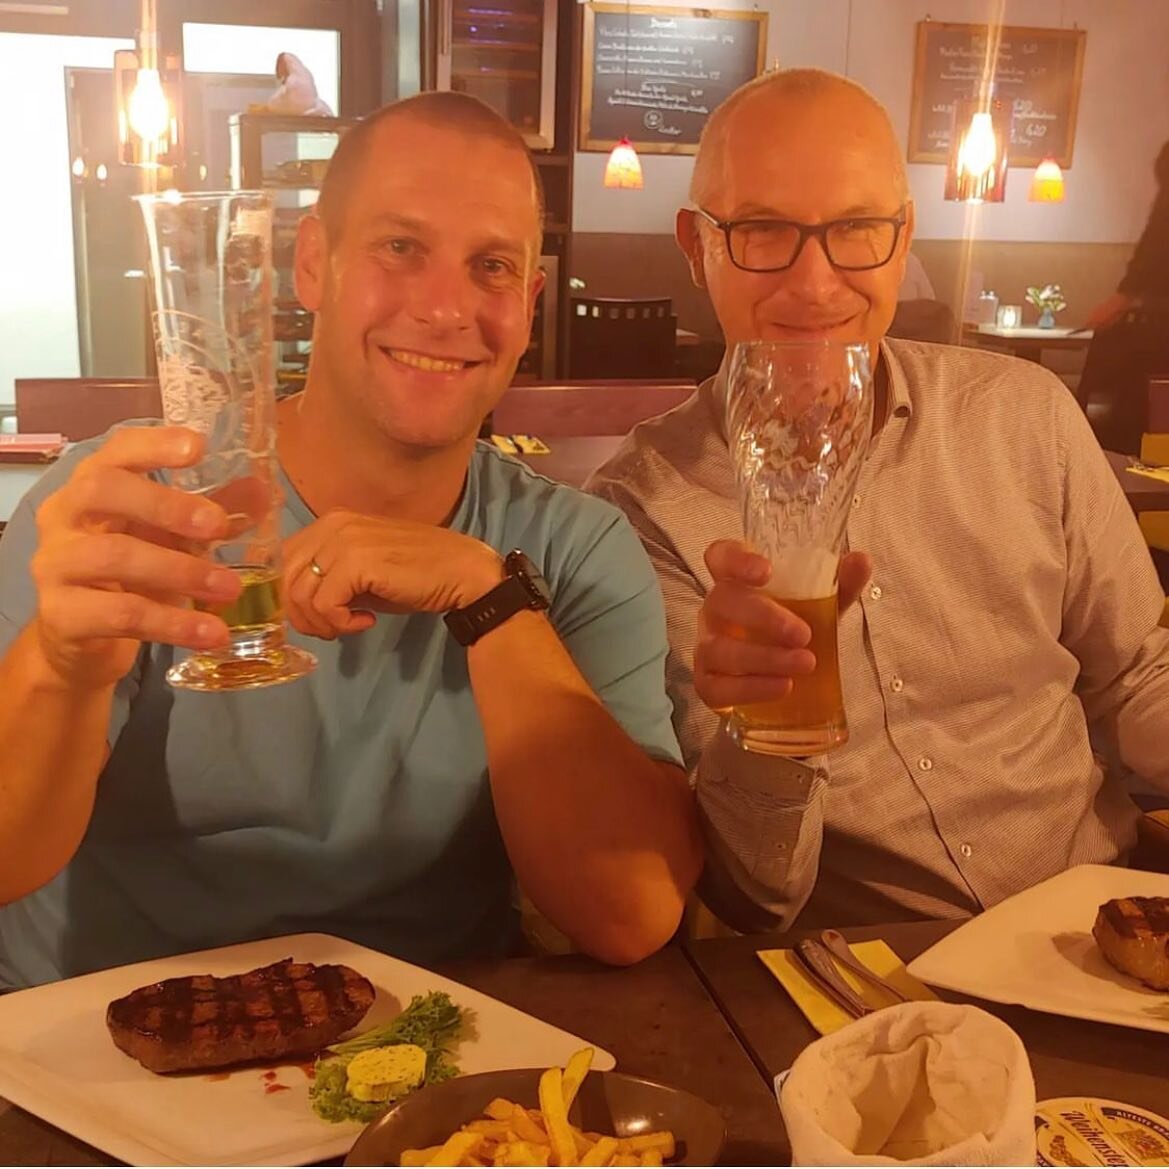 Beers and Cilia 2022 means lots of fun catching up with everyone after years on zoom. It is wonderful to chat live again!
With @karsten_boldt 
#cilia2022